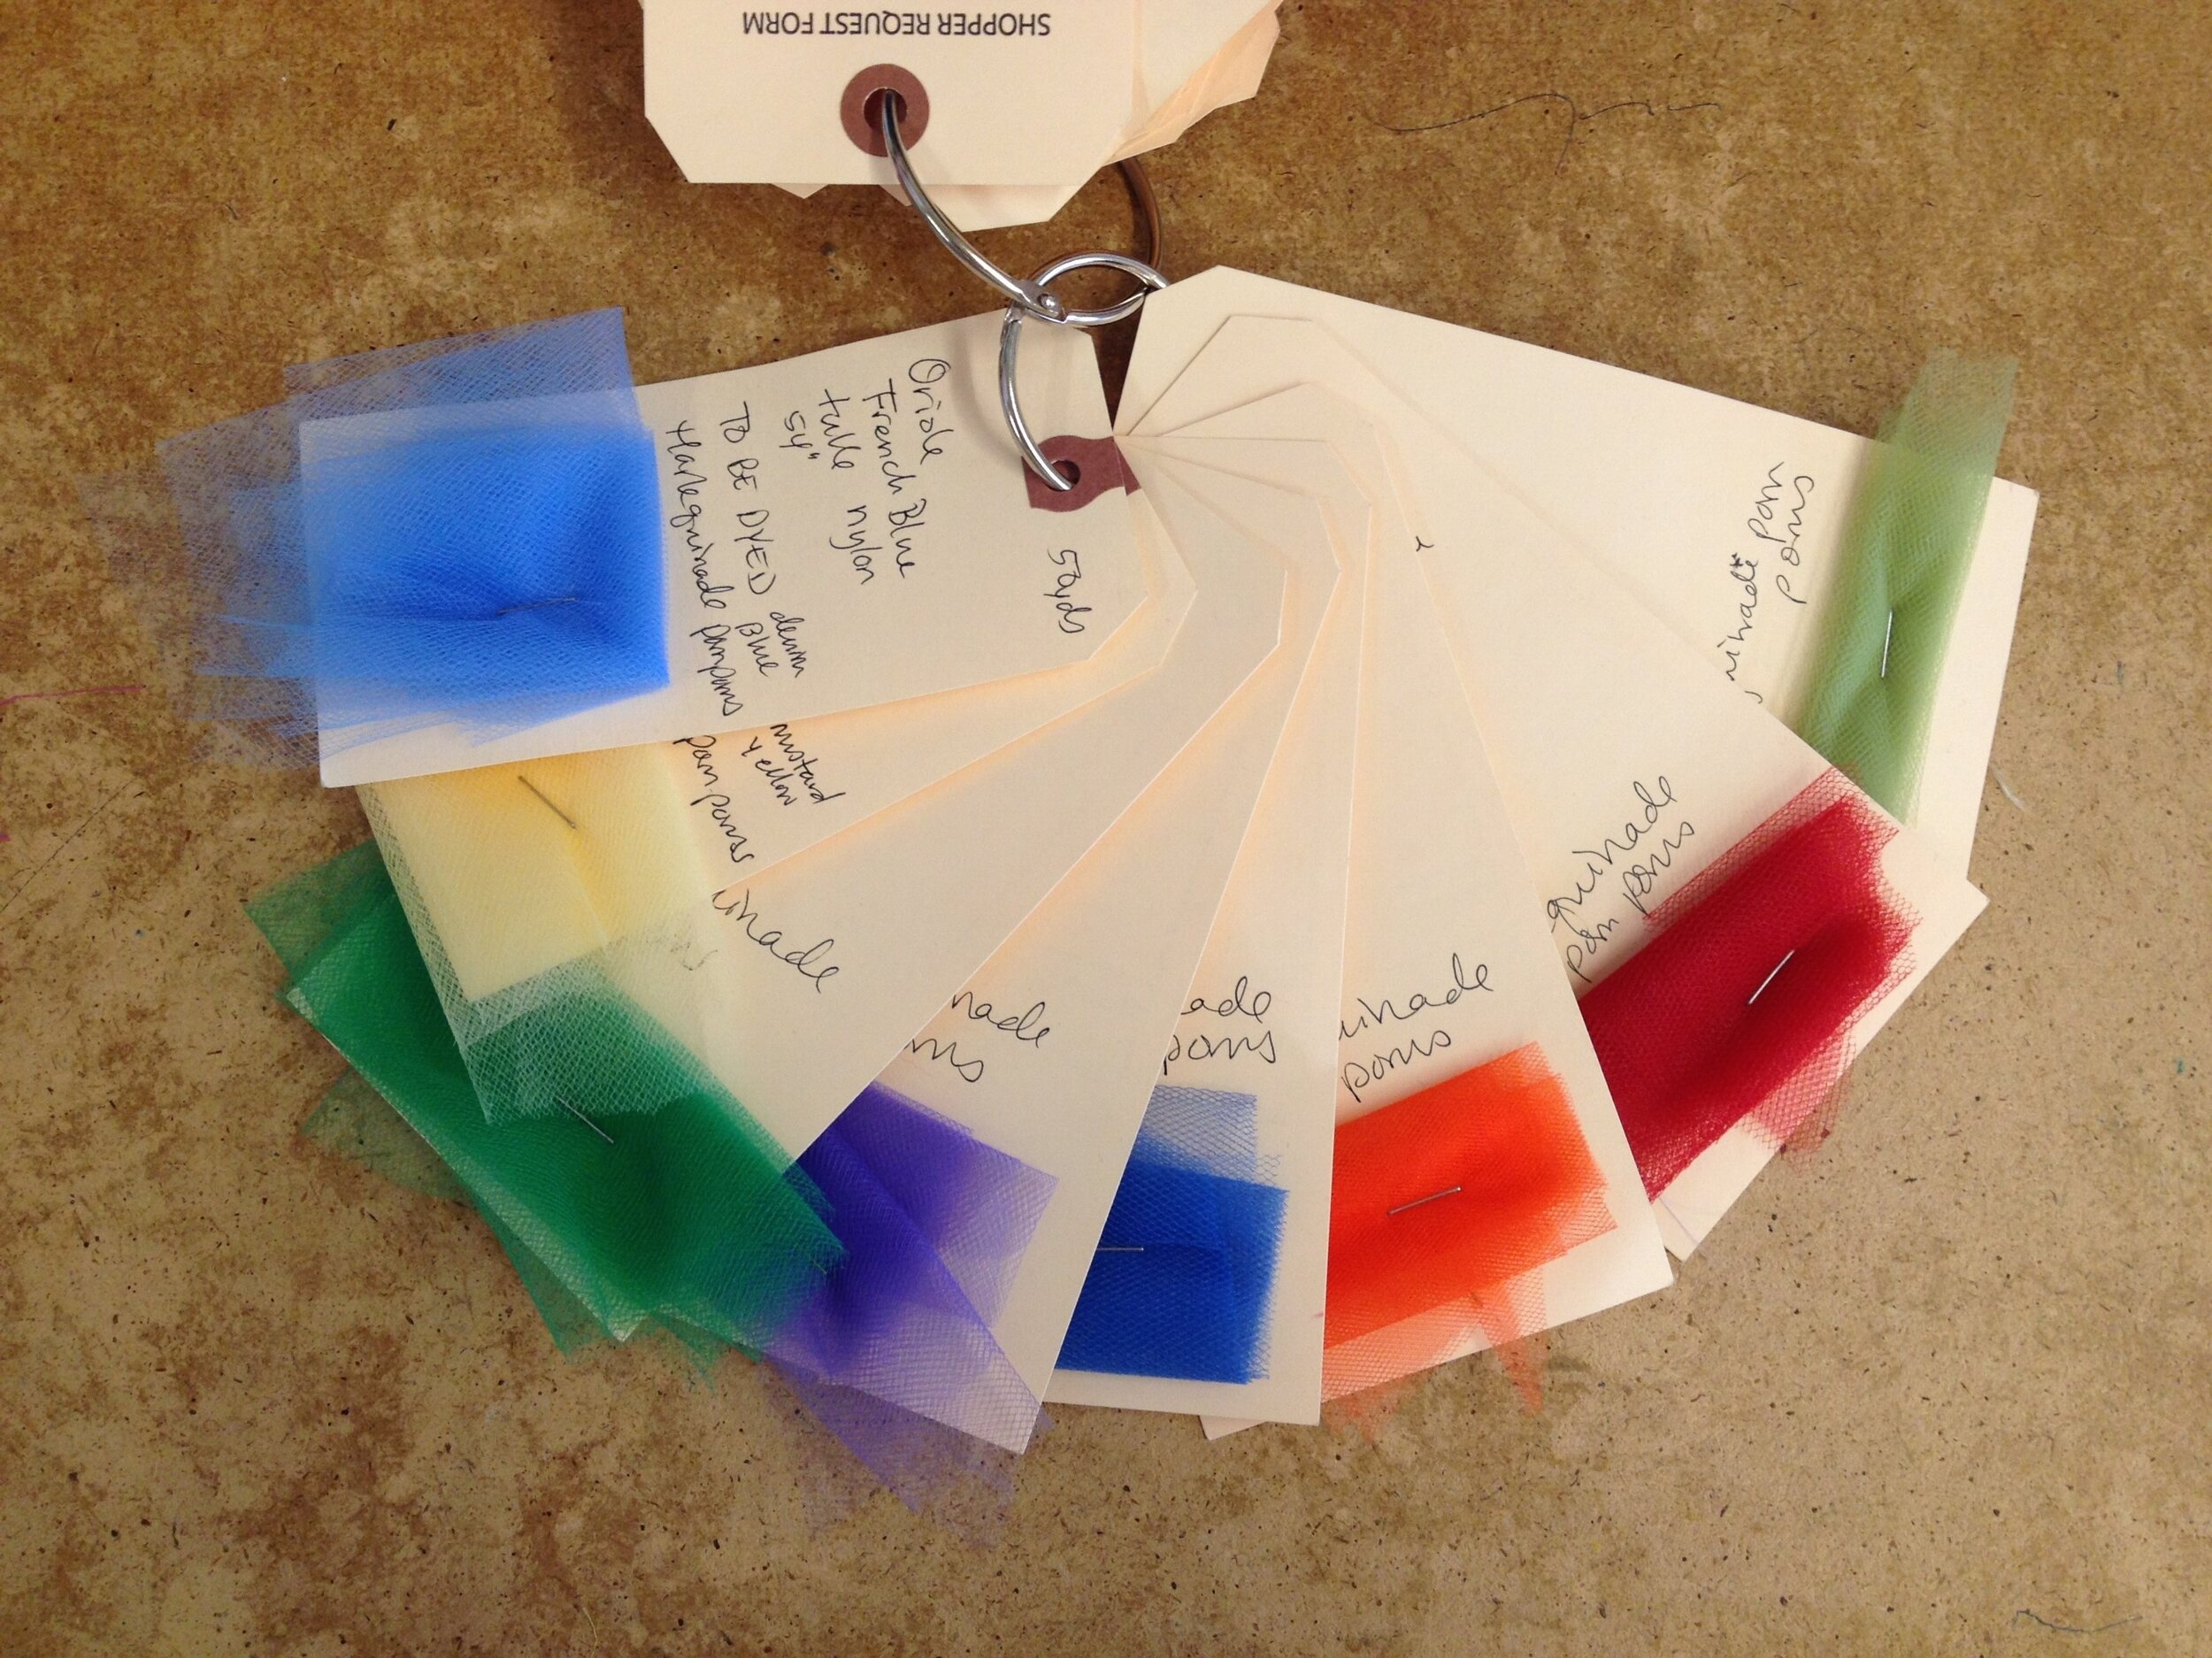 Selected tulle colors for the pom poms